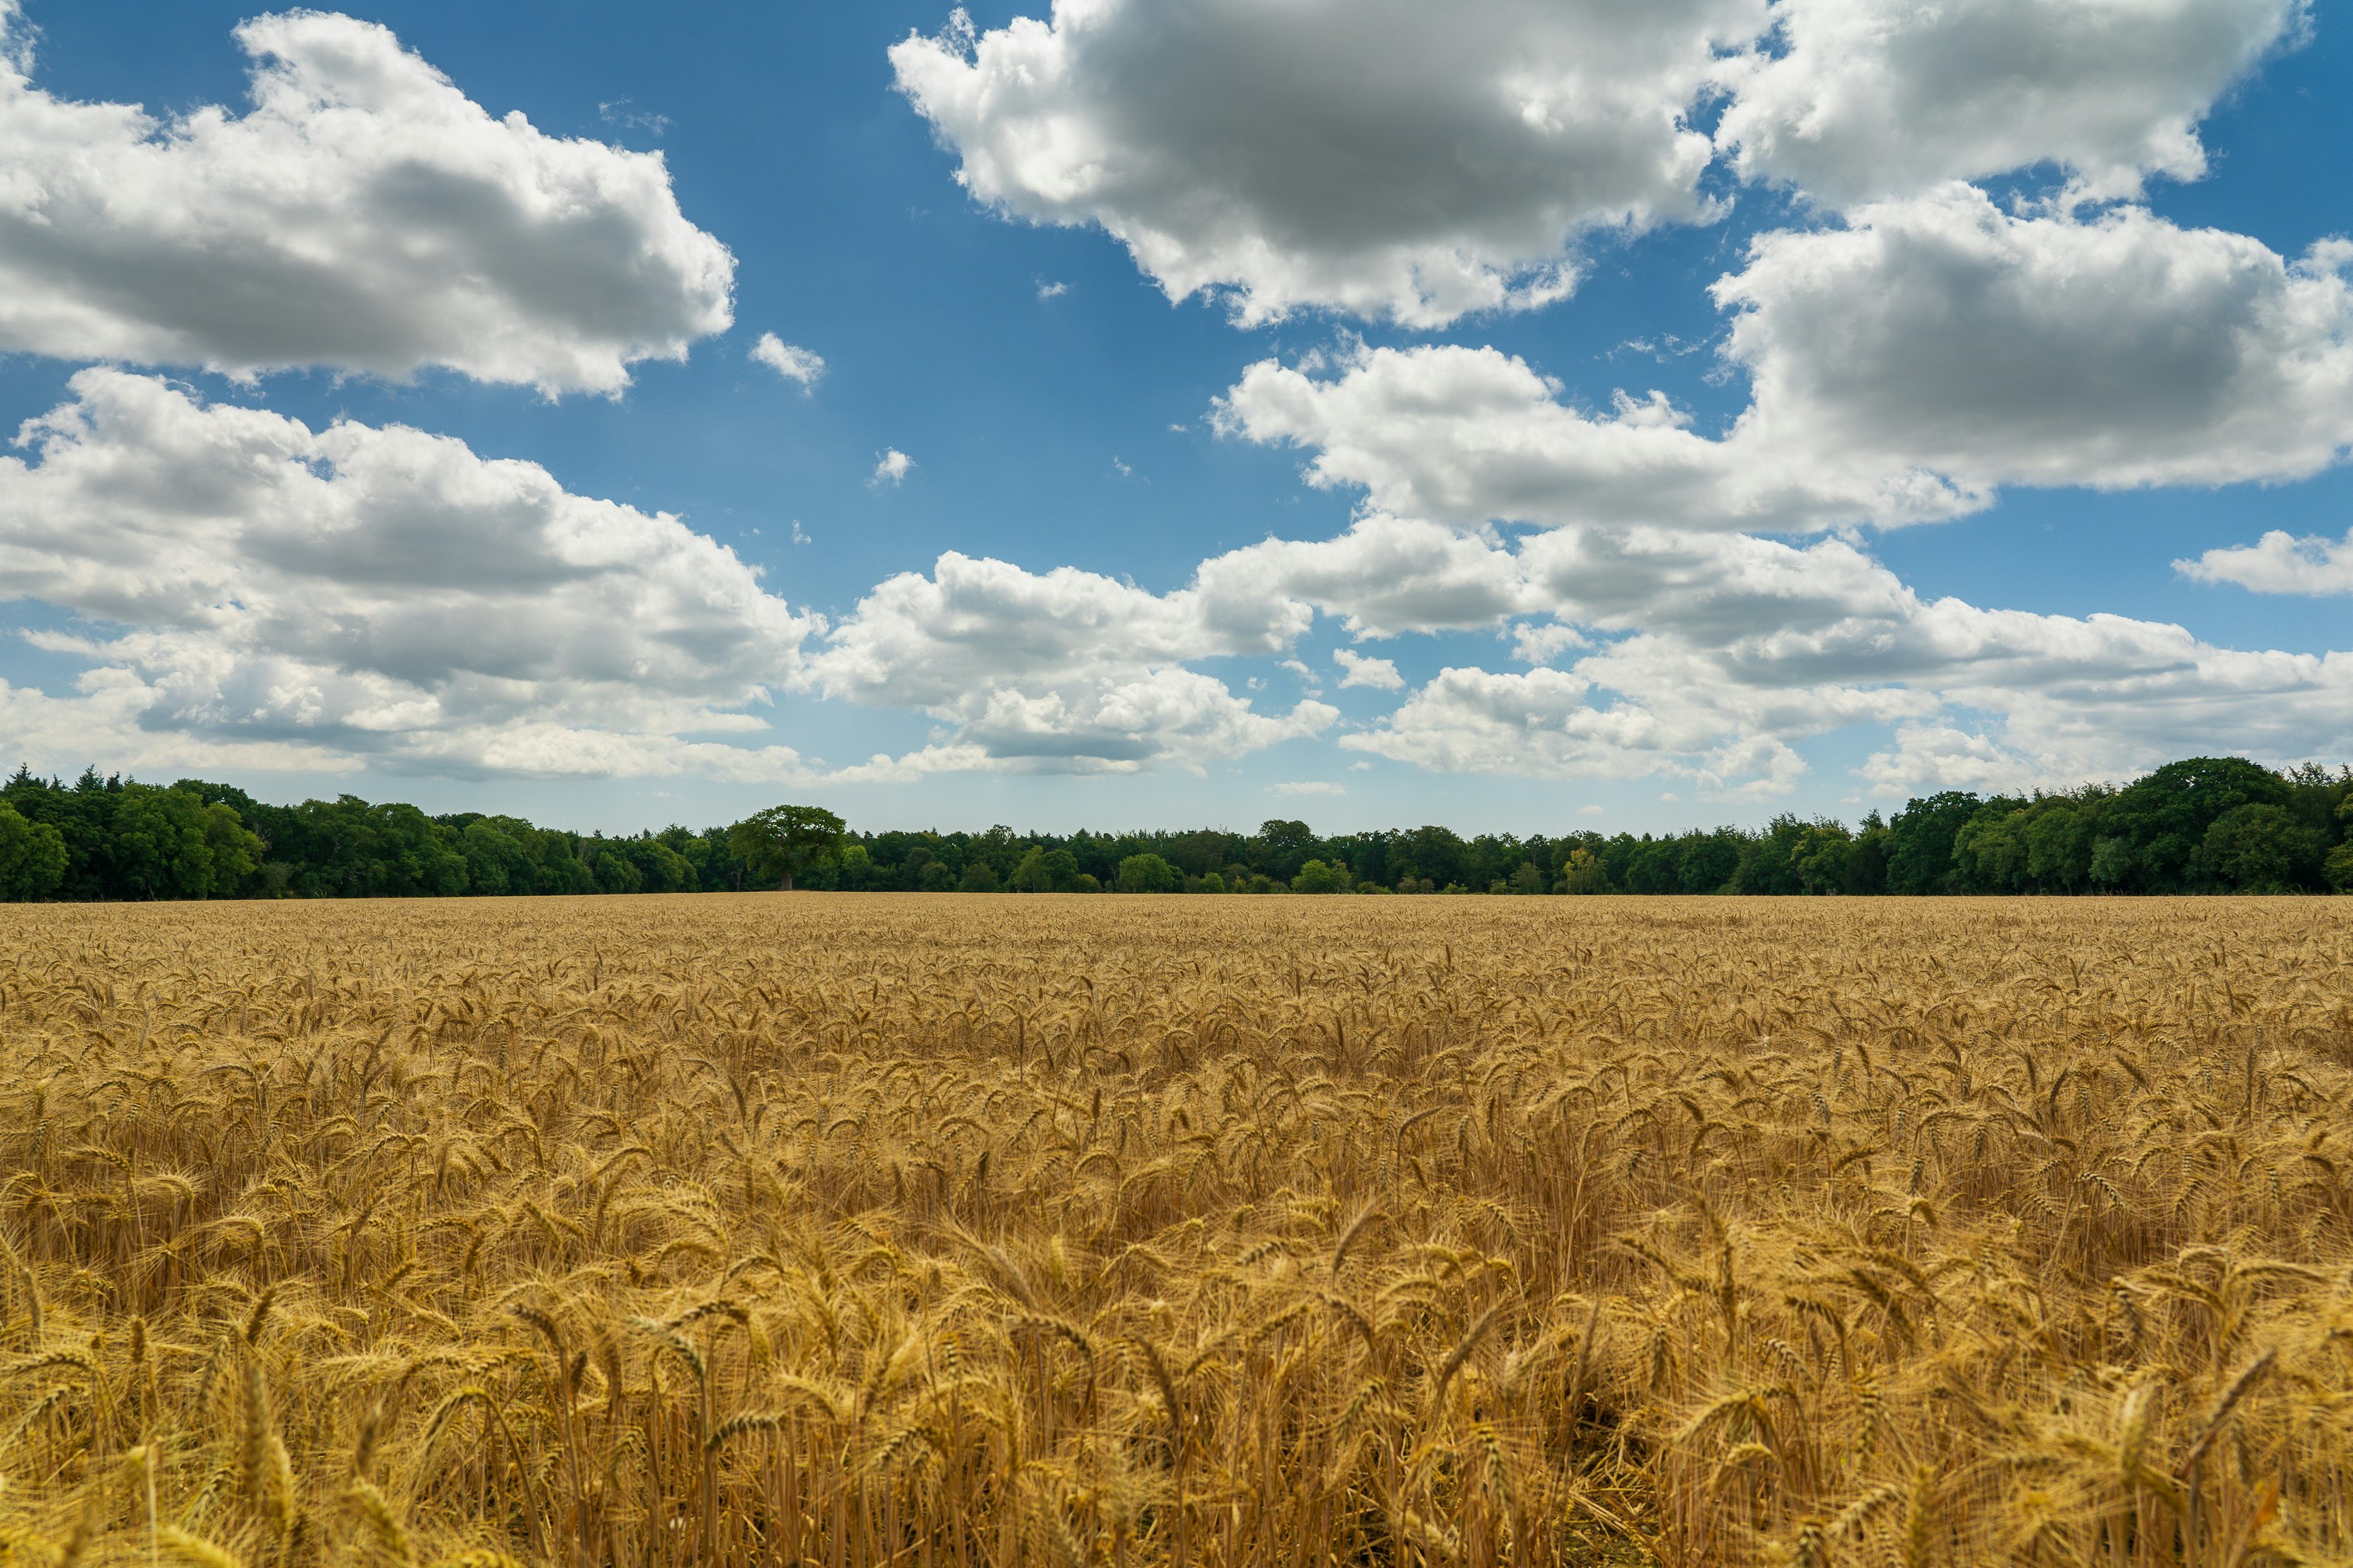 brown wheat field under blue and white cloudy sky during daytime